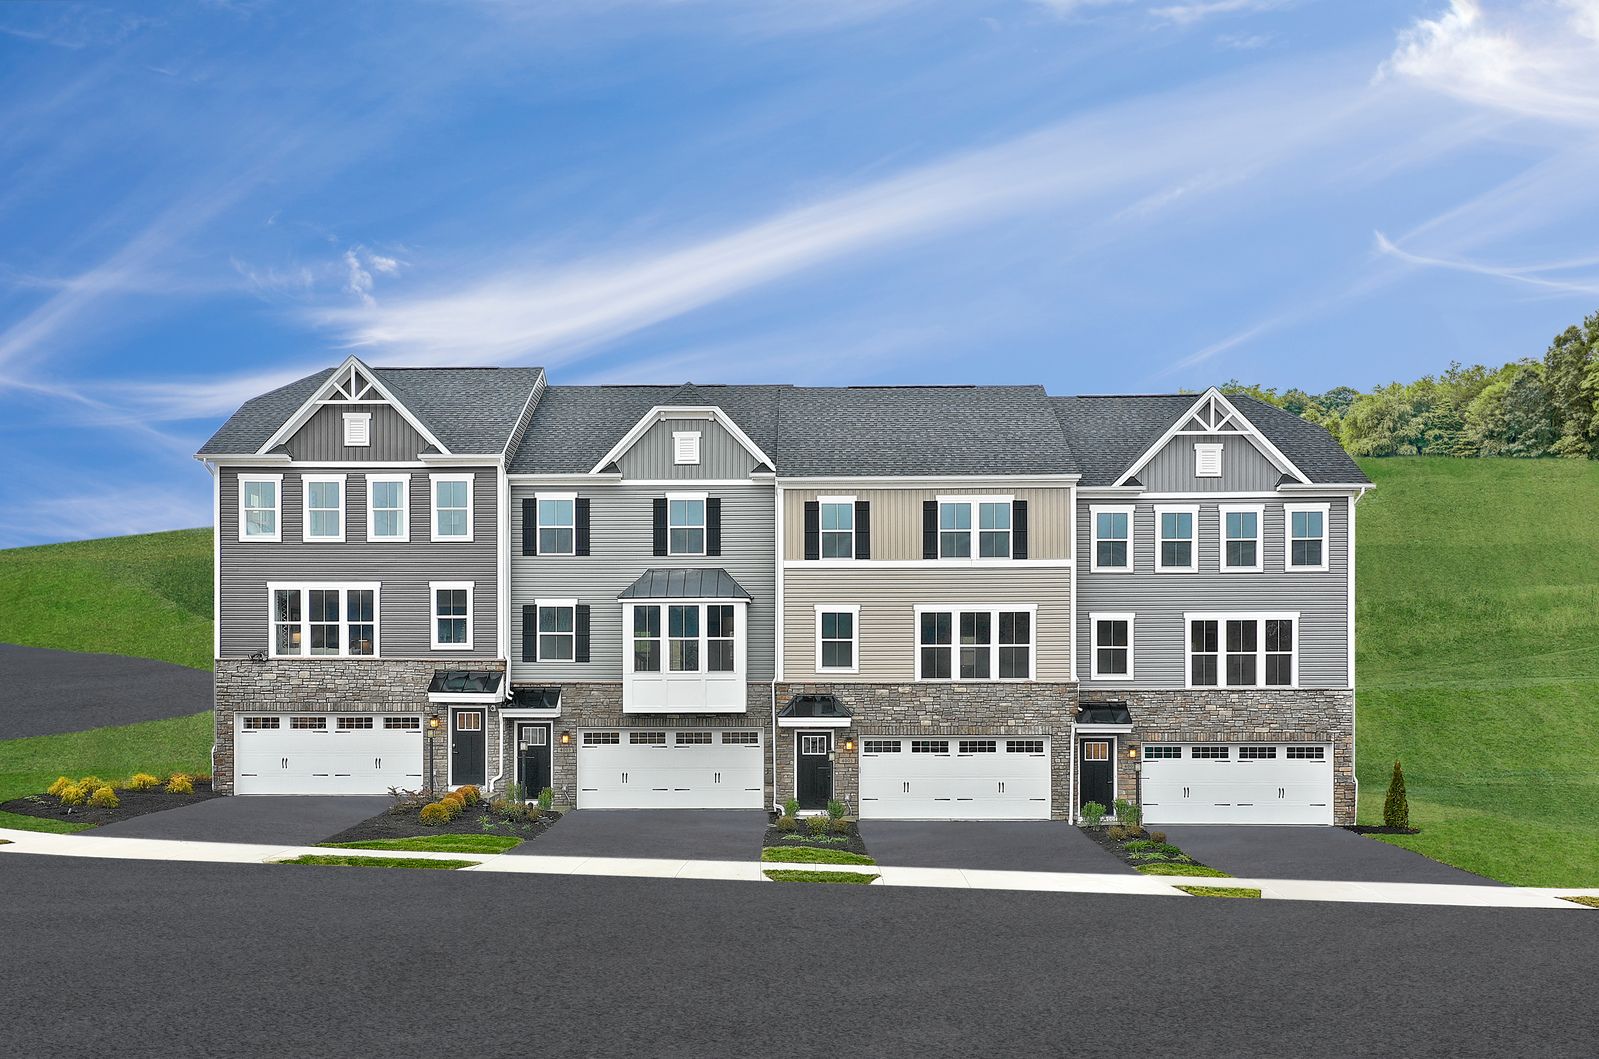 Final Phase now selling in Summit Station Townhomes!